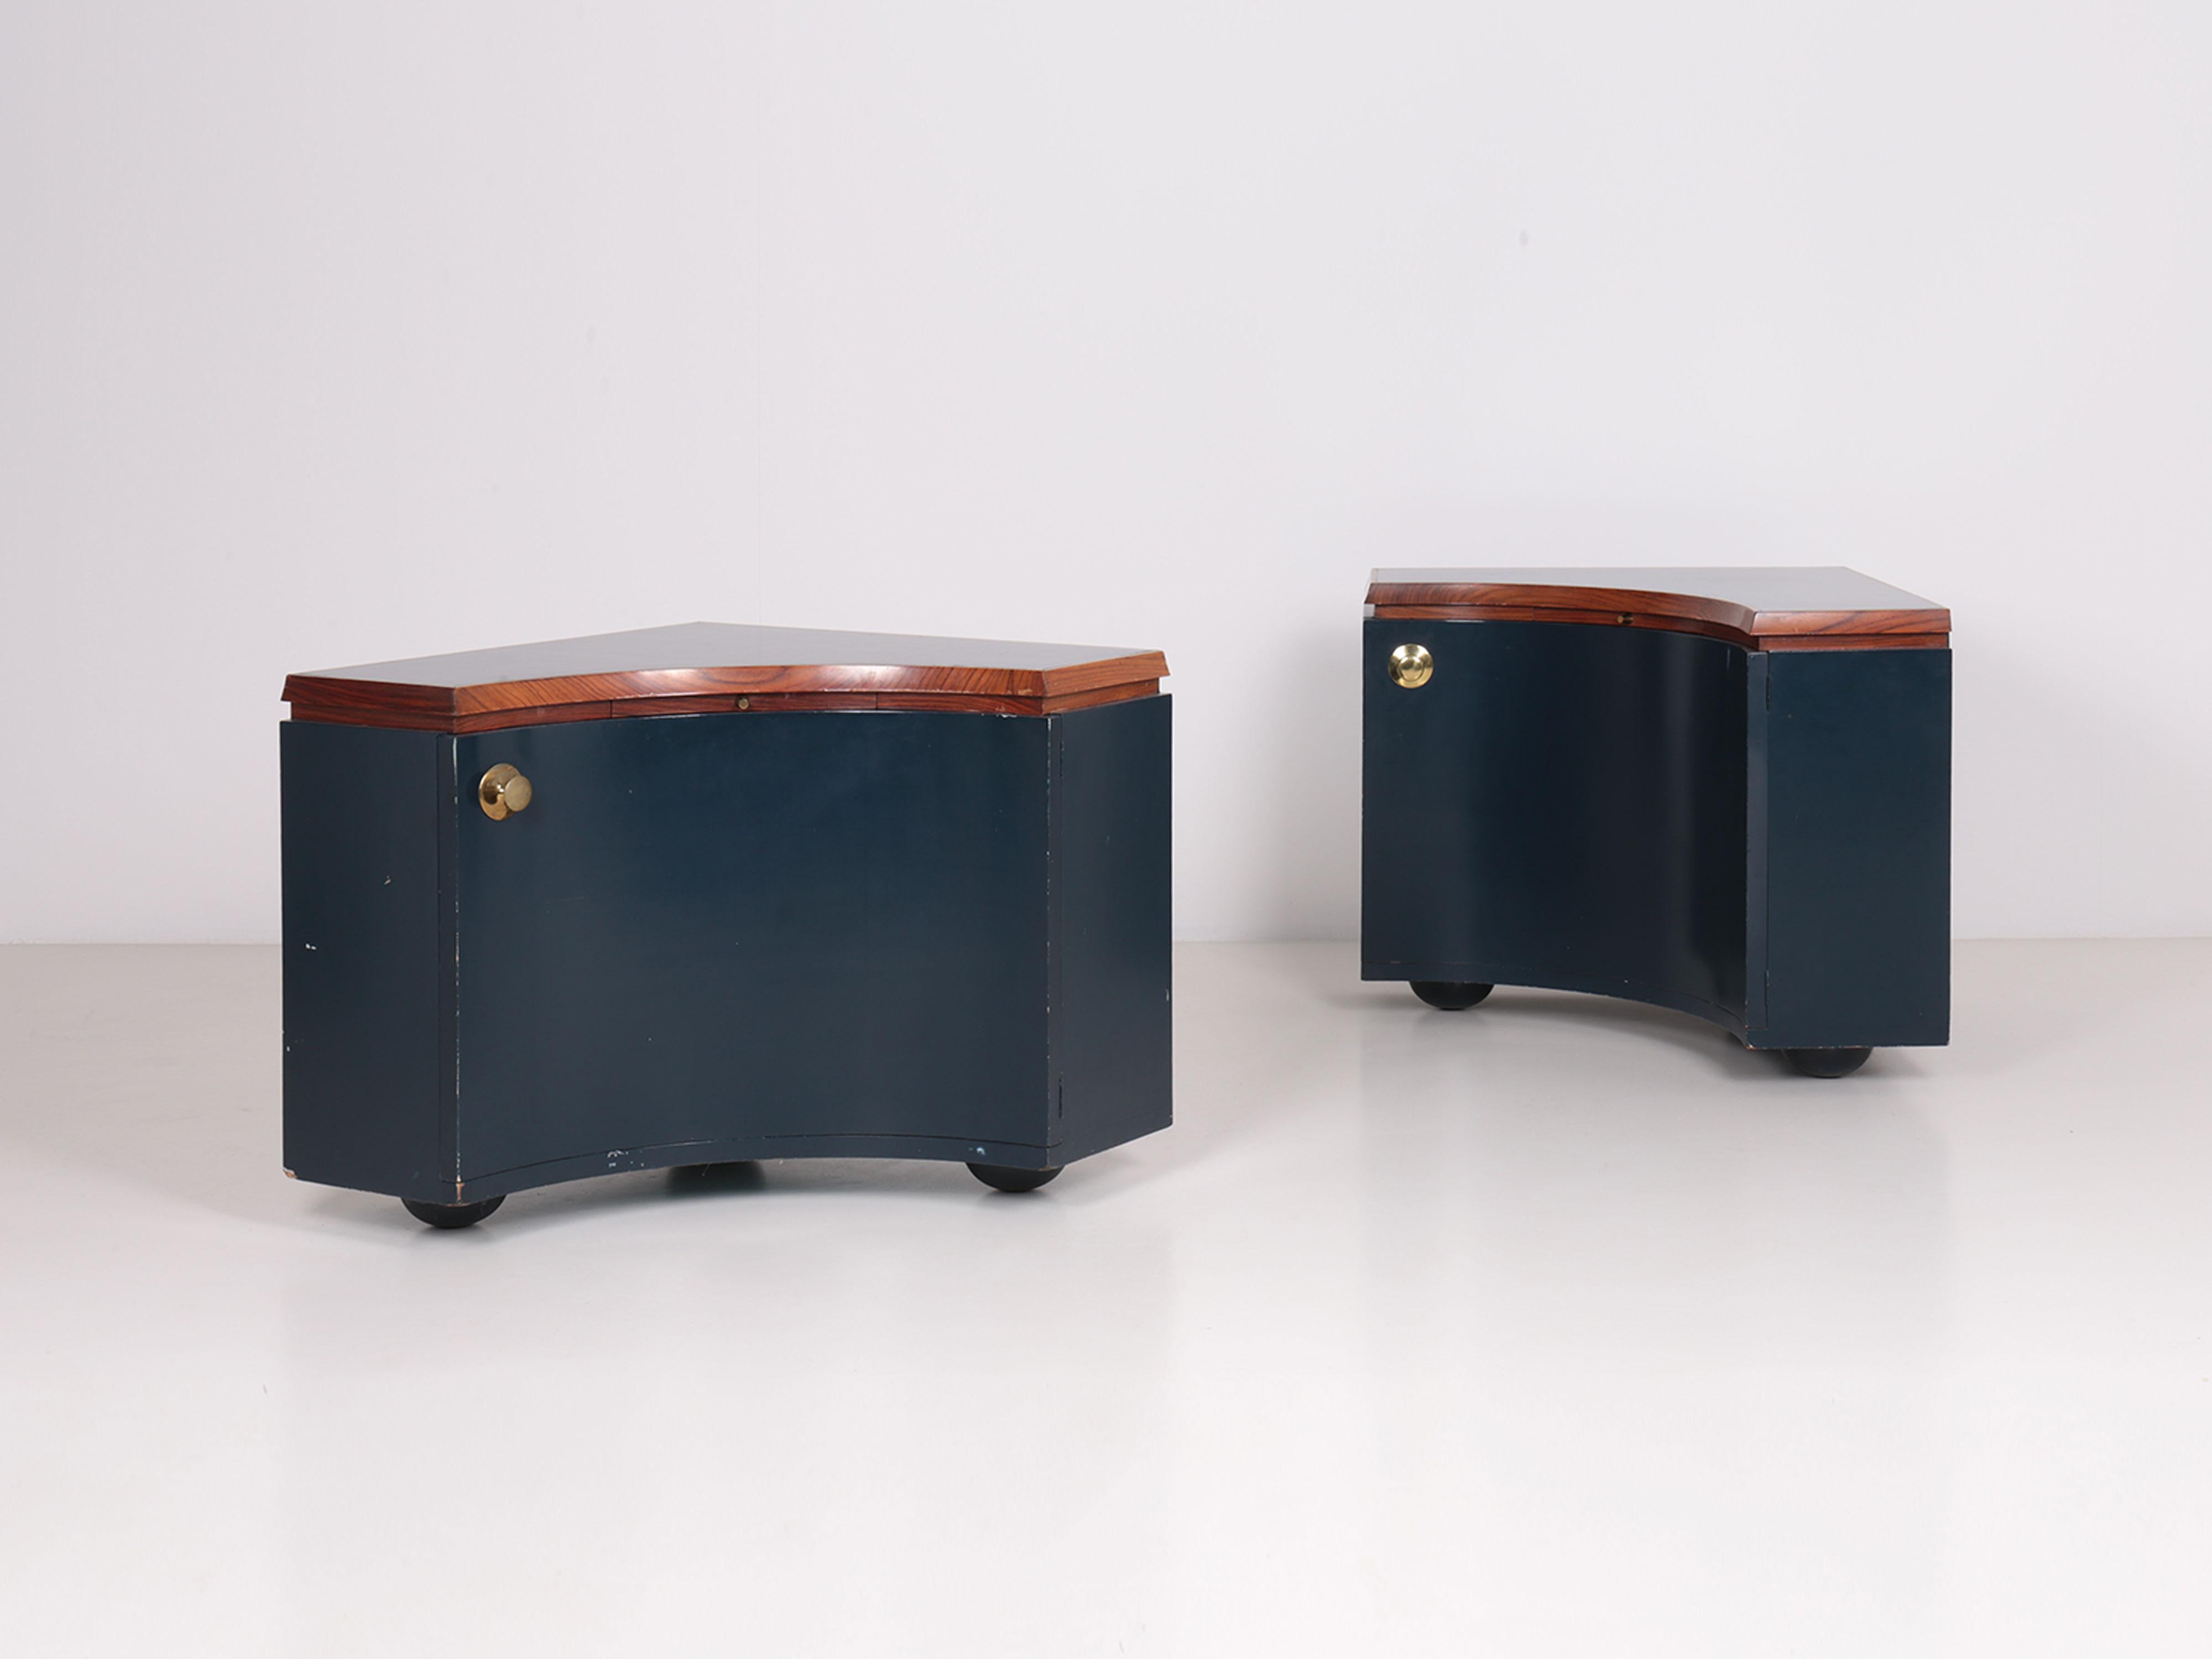 Pair of corner units by Luigi Caccia Dominioni, unique pieces realized for the house of painter Sergio Vacchi in Bologna.

Structure in lacquered wood, rosewood edges and brass finishes. Door with internal drawer and retractable writing desk.